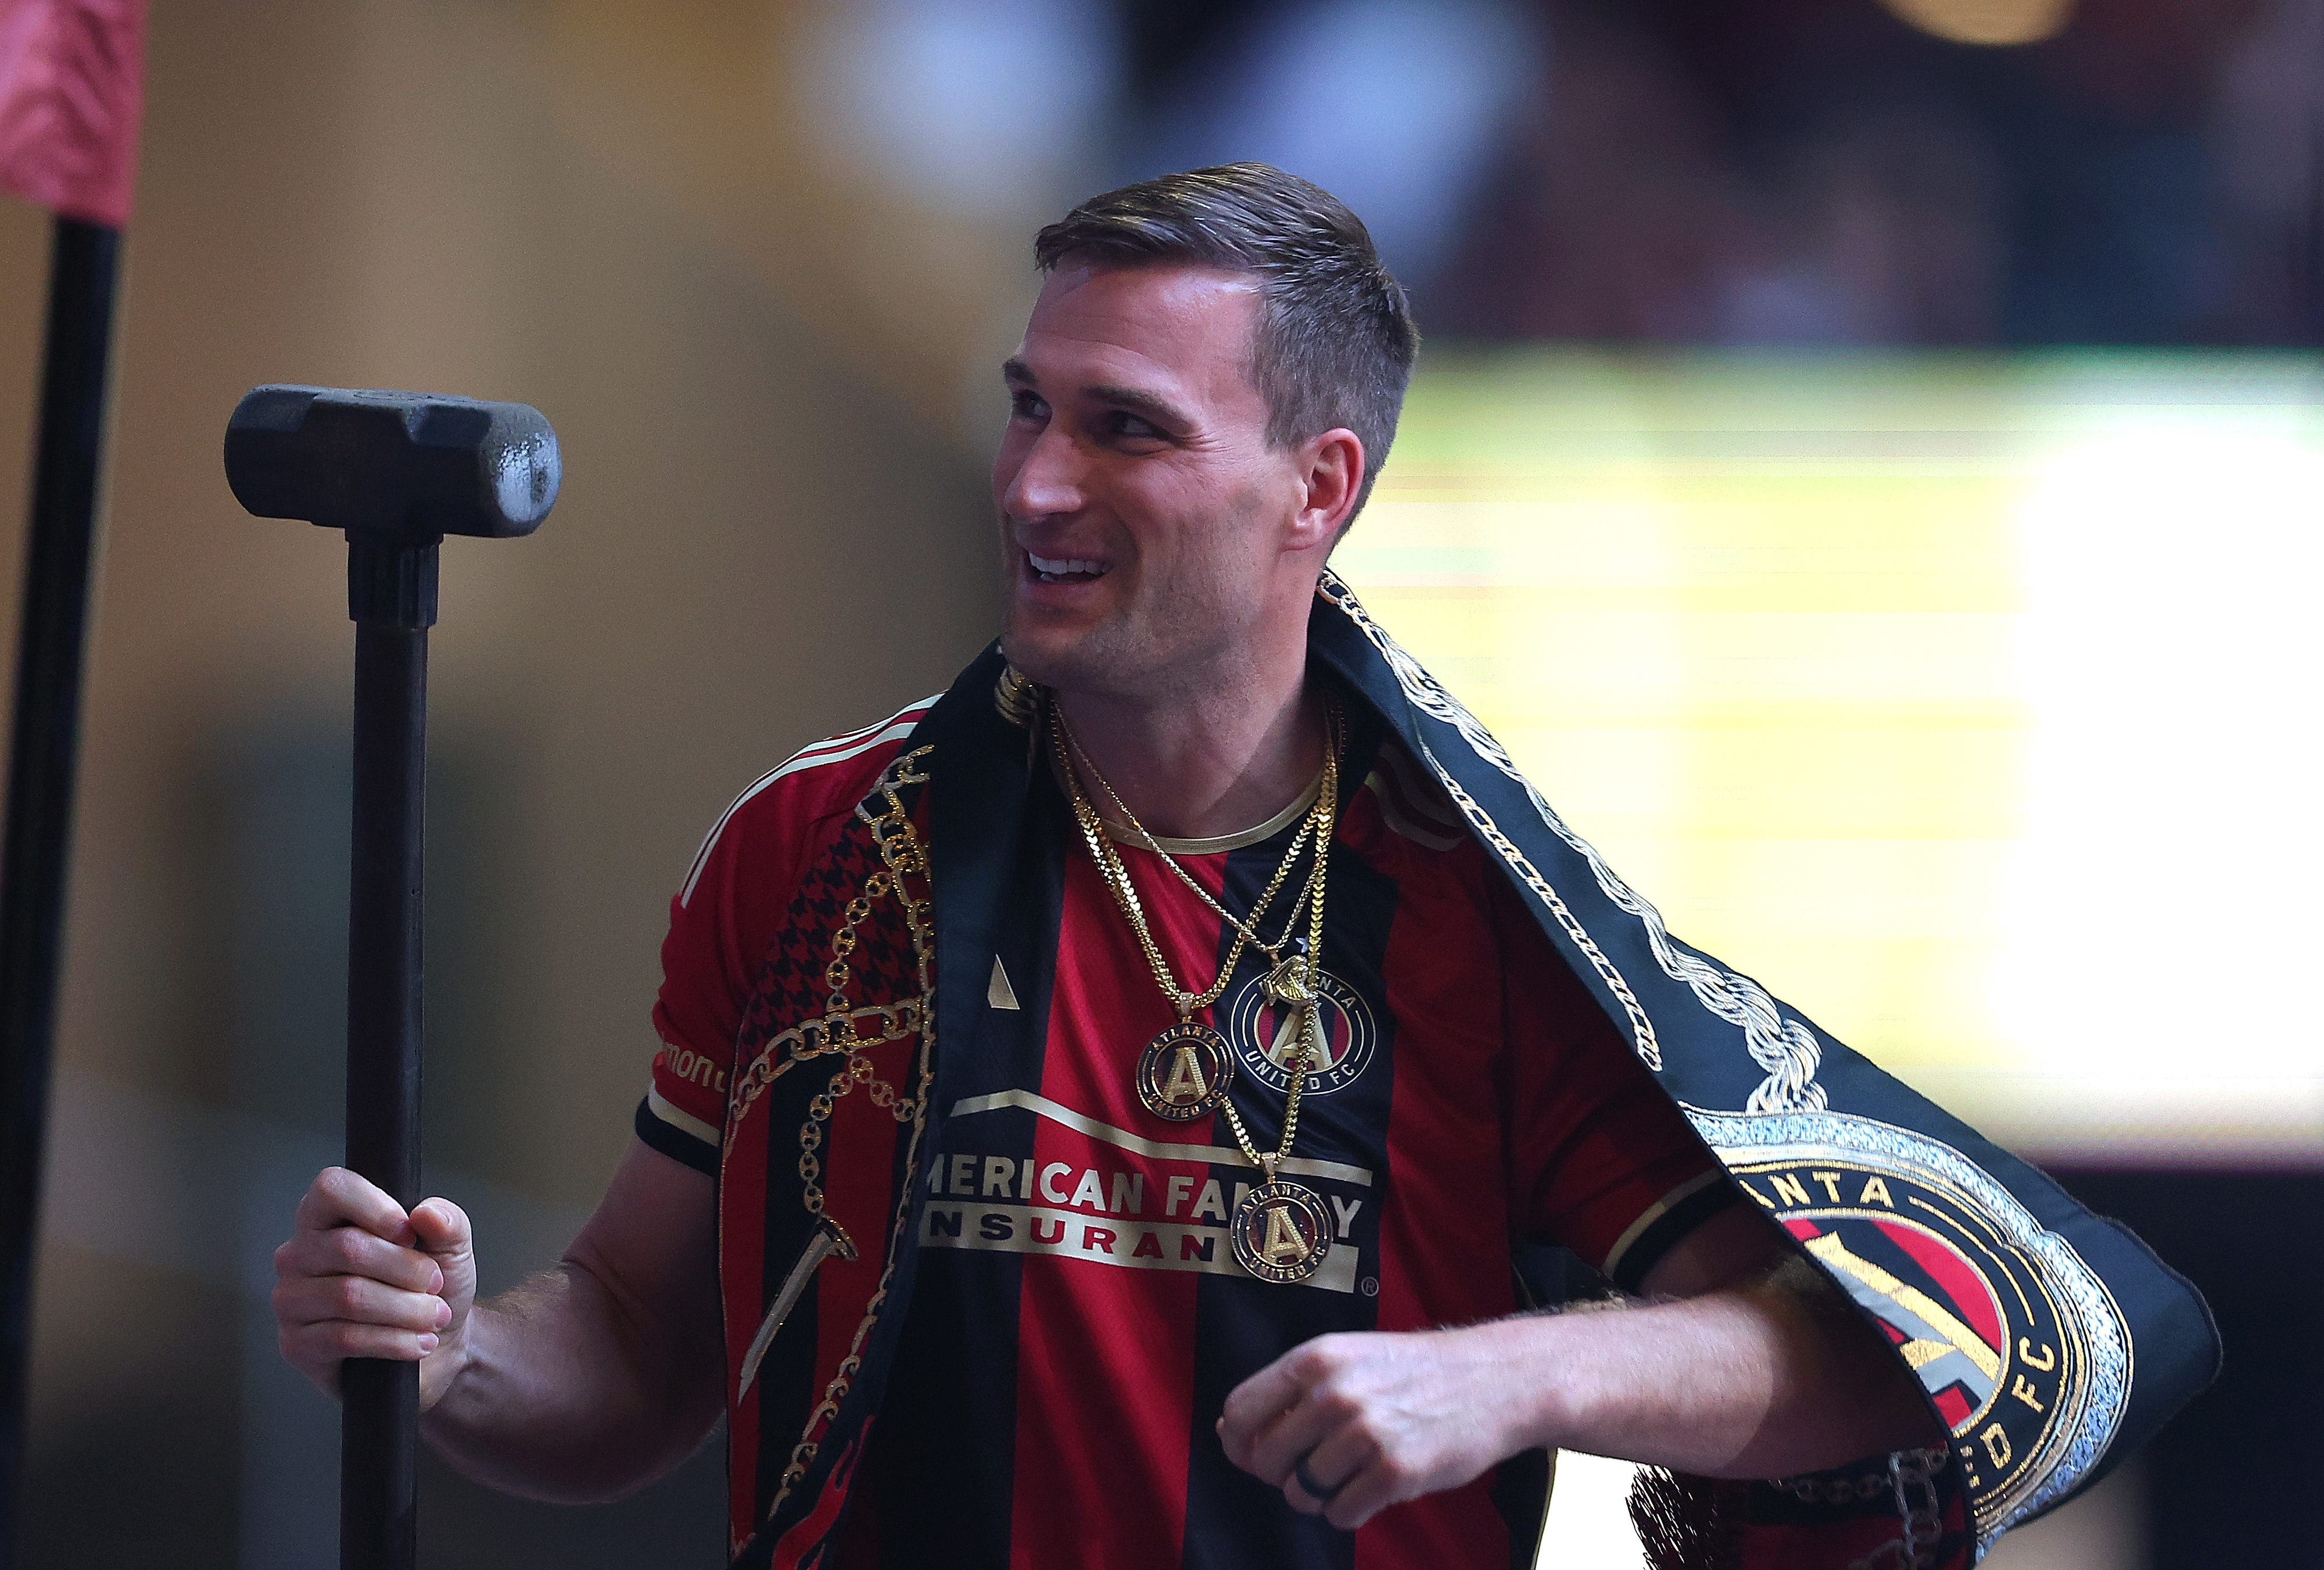 A smiling soccer player rings a bell, wearing an Atlanta United jersey with a championship medallion